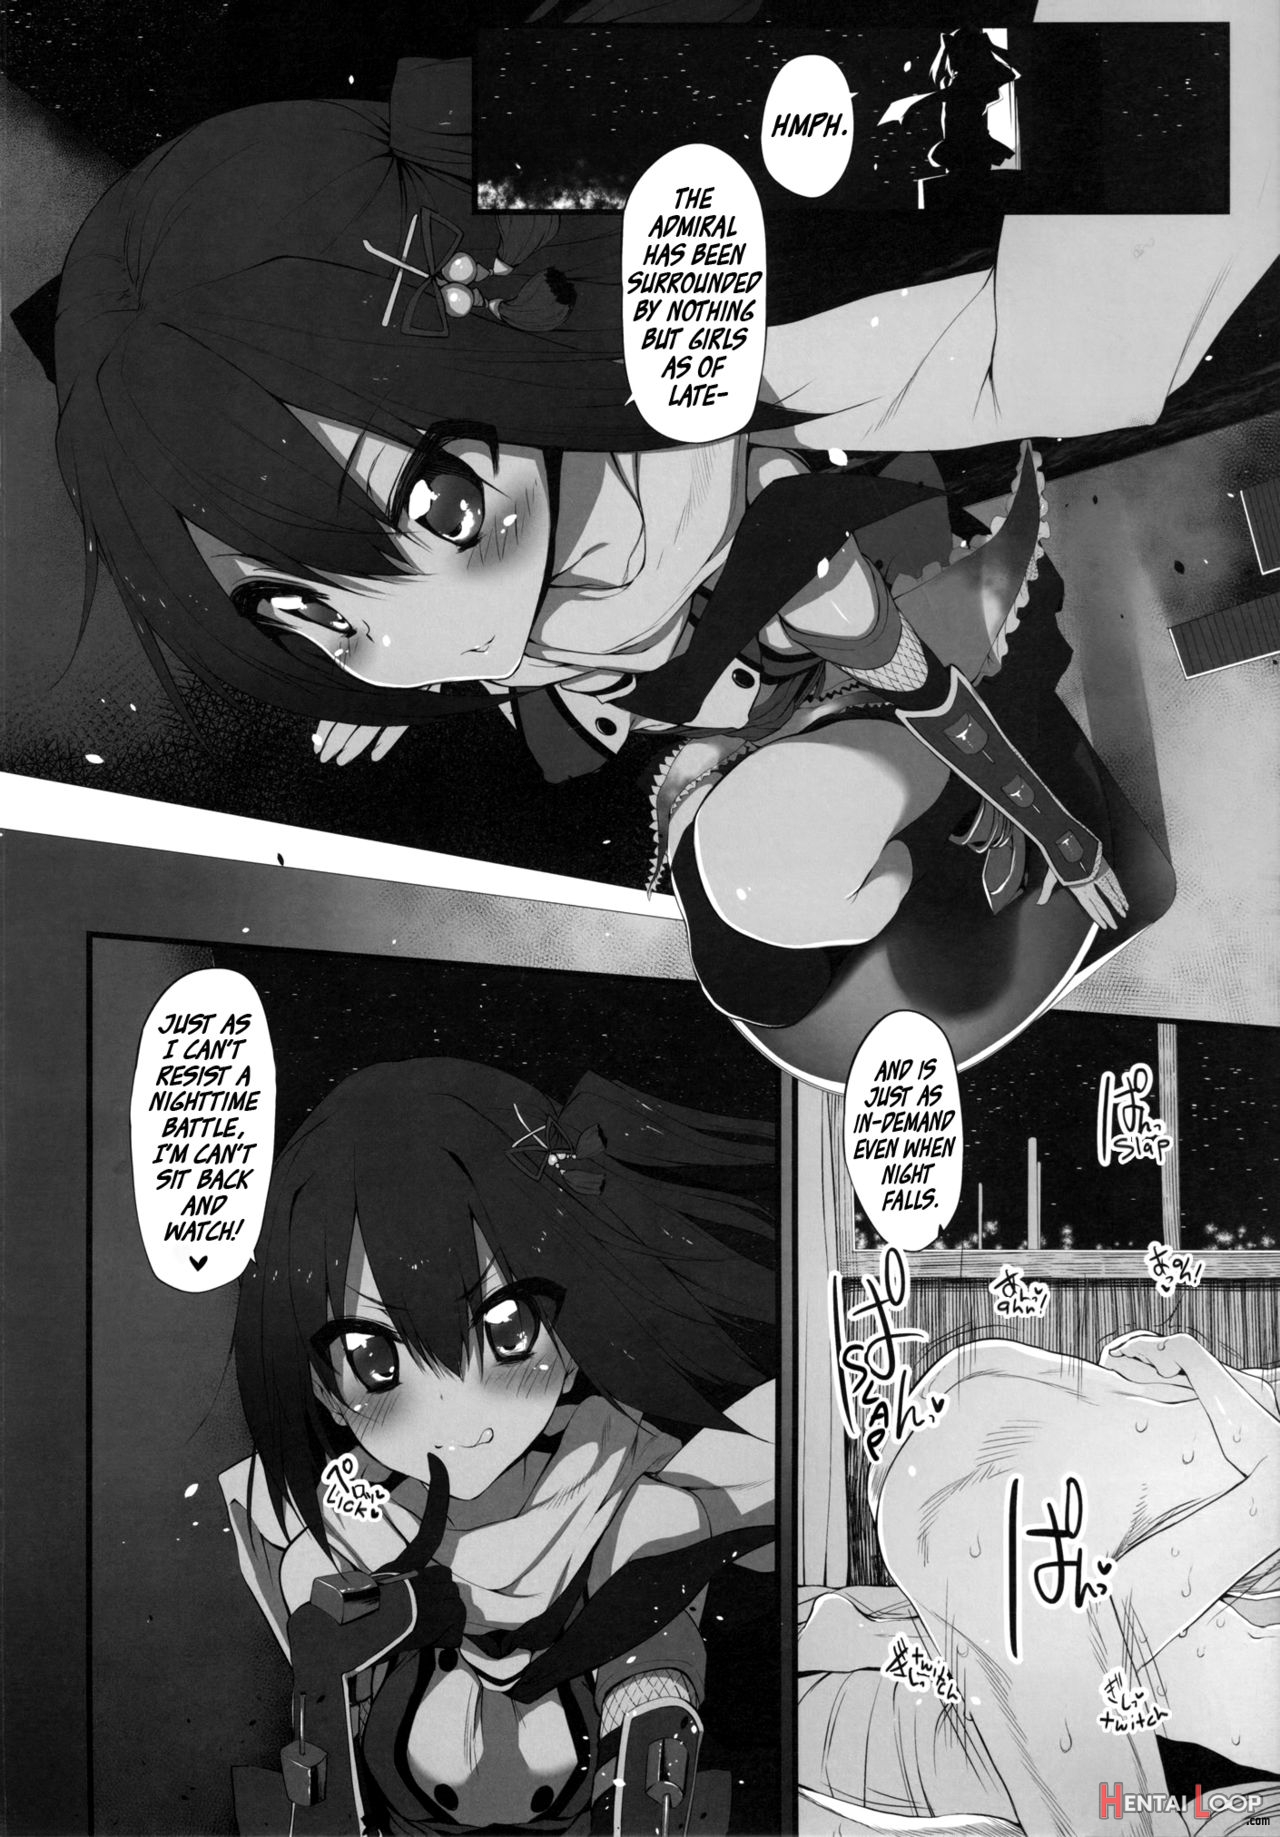 Marked Girls Vol. 4 page 2